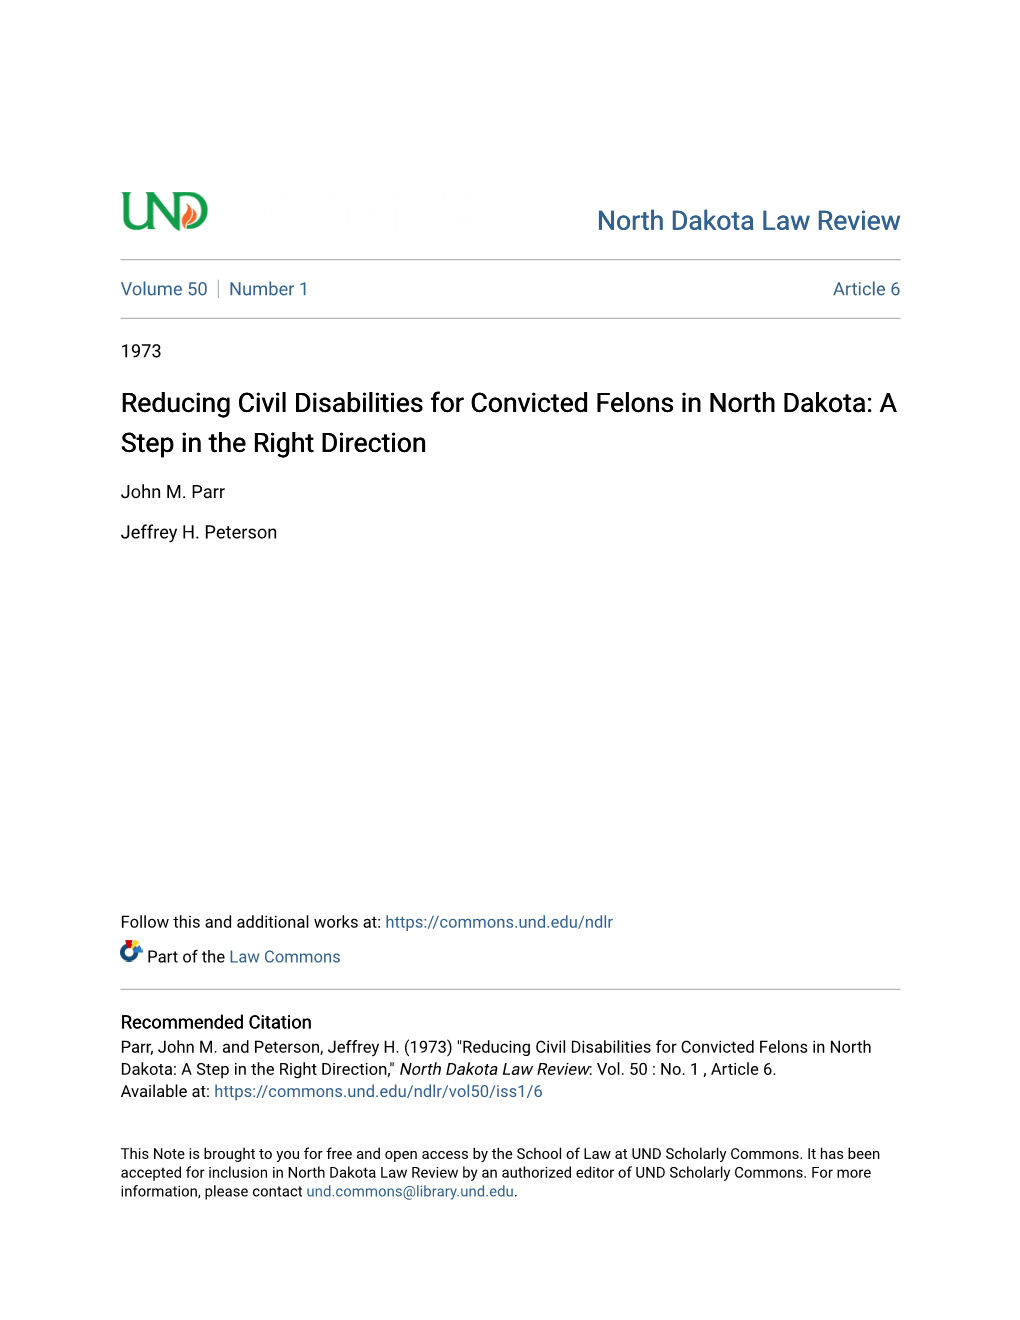 Reducing Civil Disabilities for Convicted Felons in North Dakota: a Step in the Right Direction